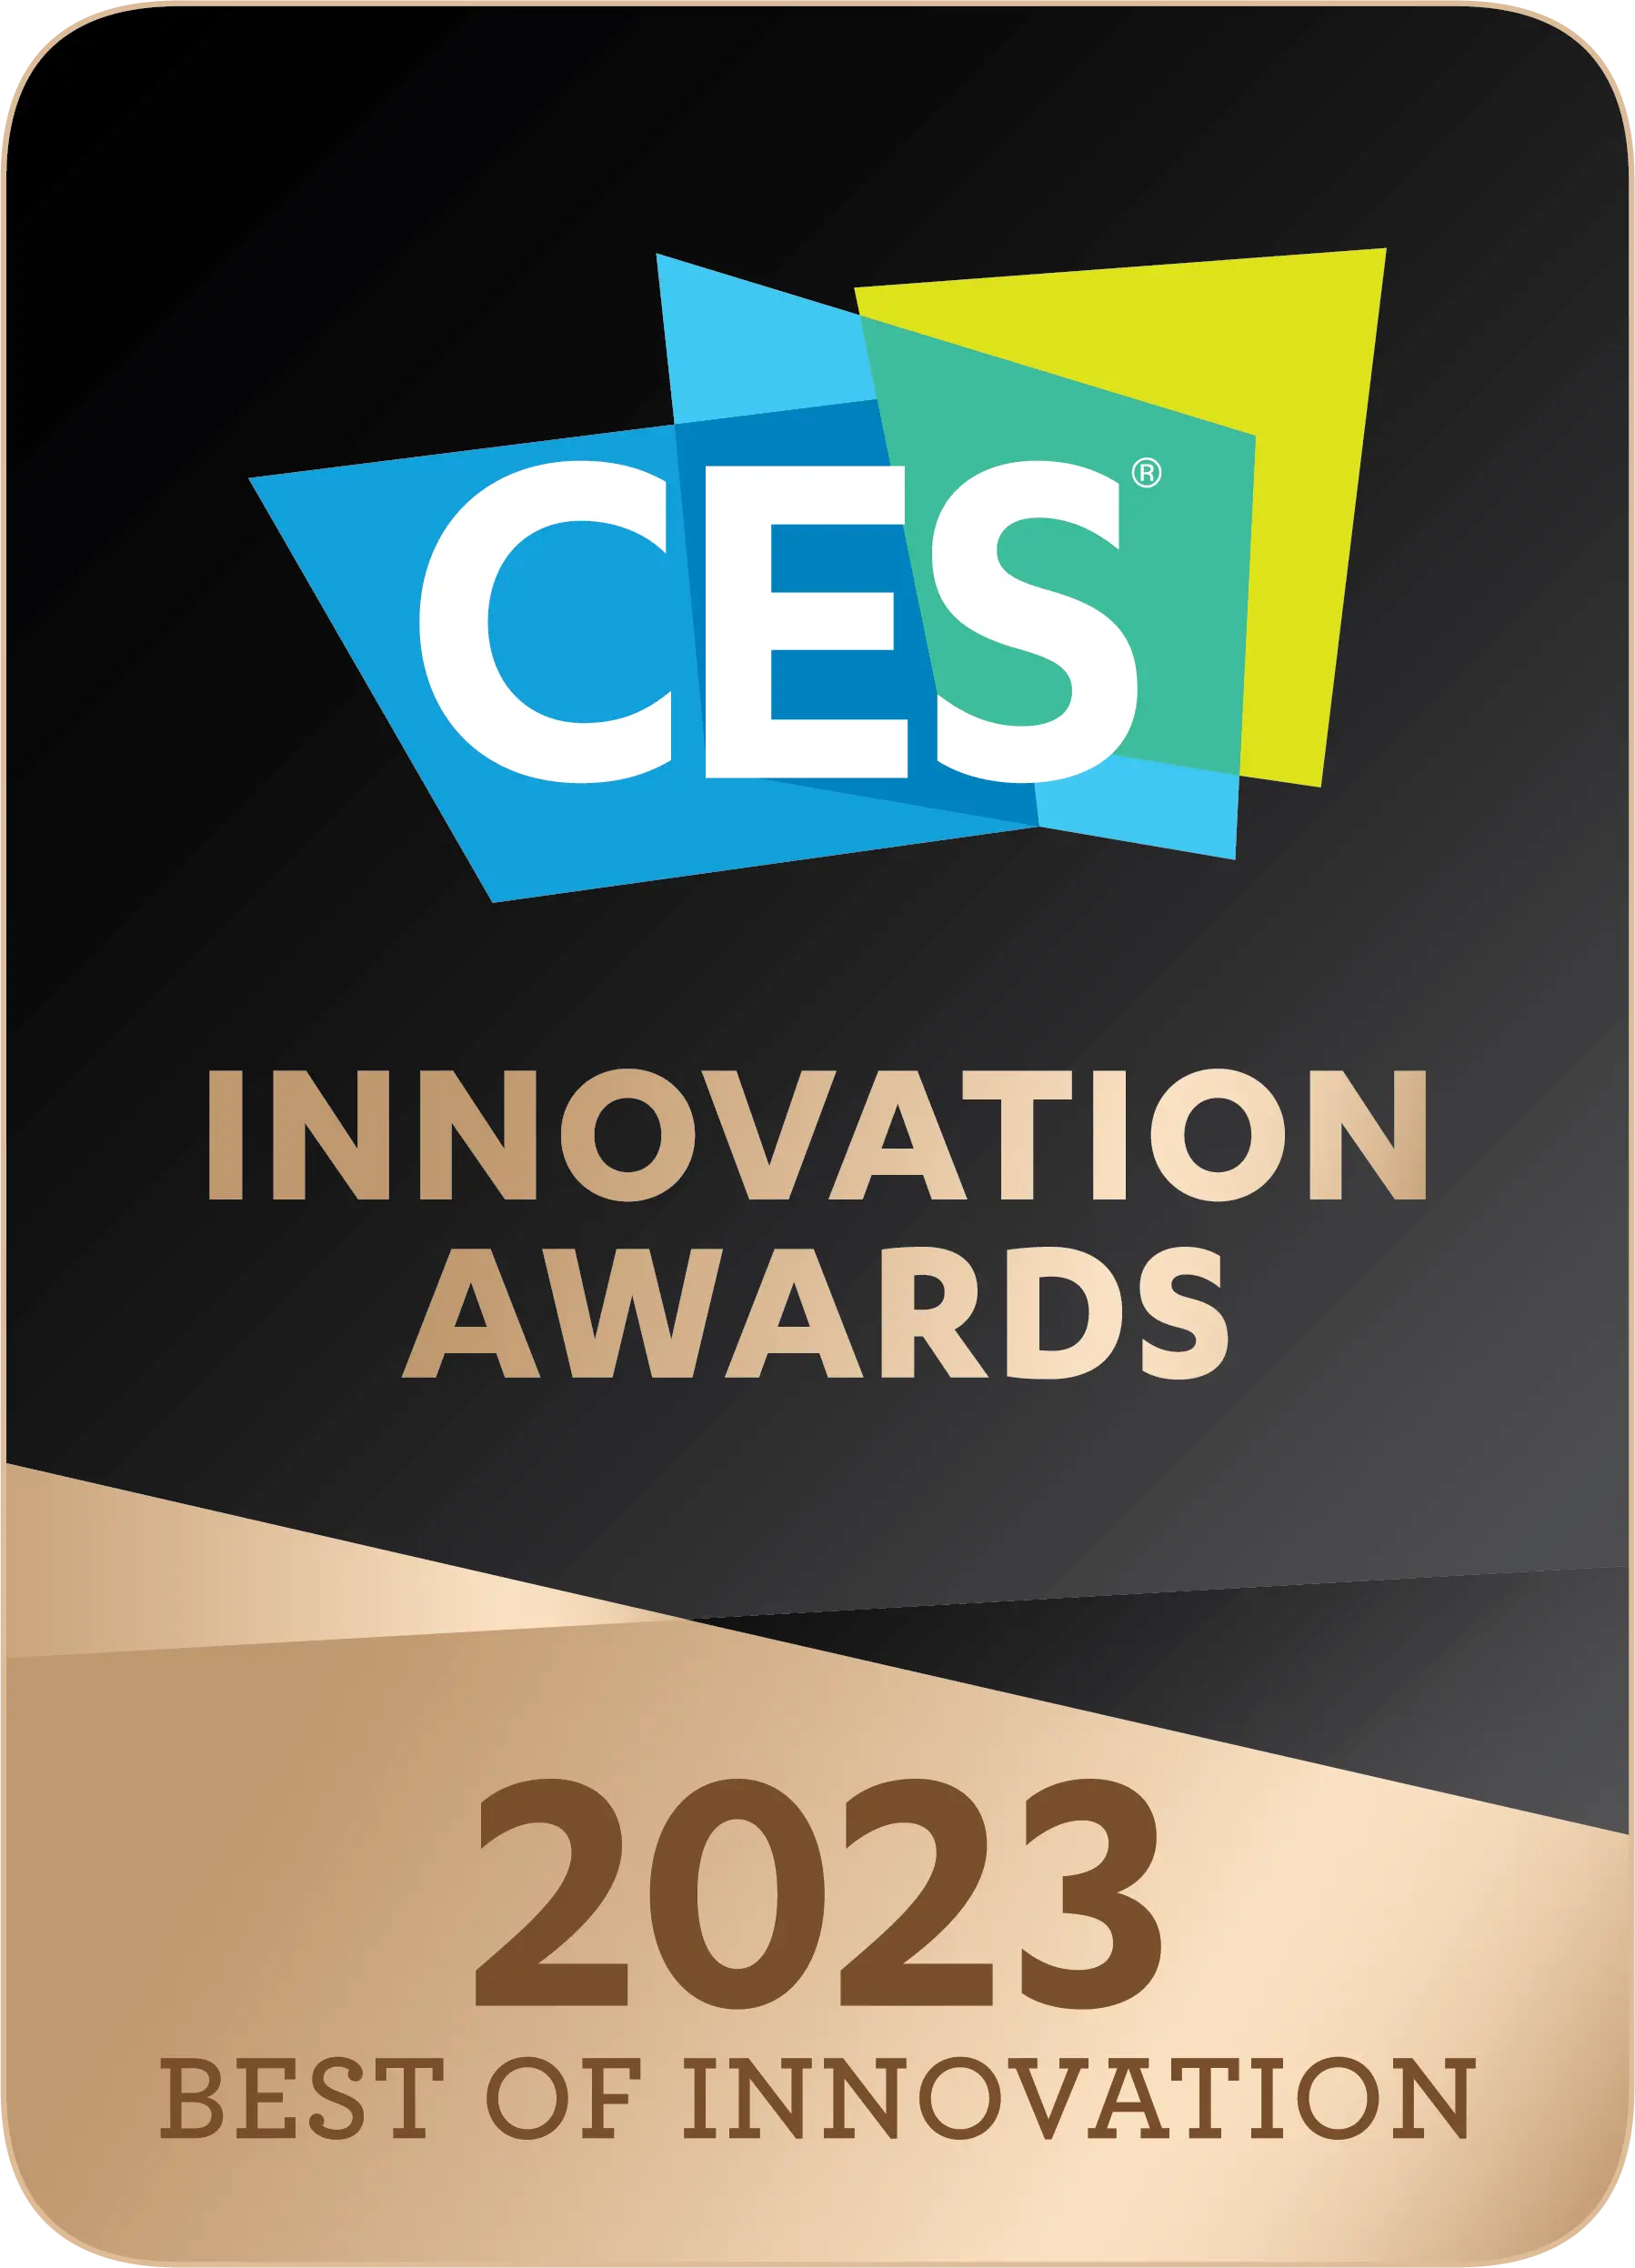 Xplora Receives CES 2023 “Best of Innovation” Award for Their Brand New  Premium Model Smartwatch for Kids - the X6Play!